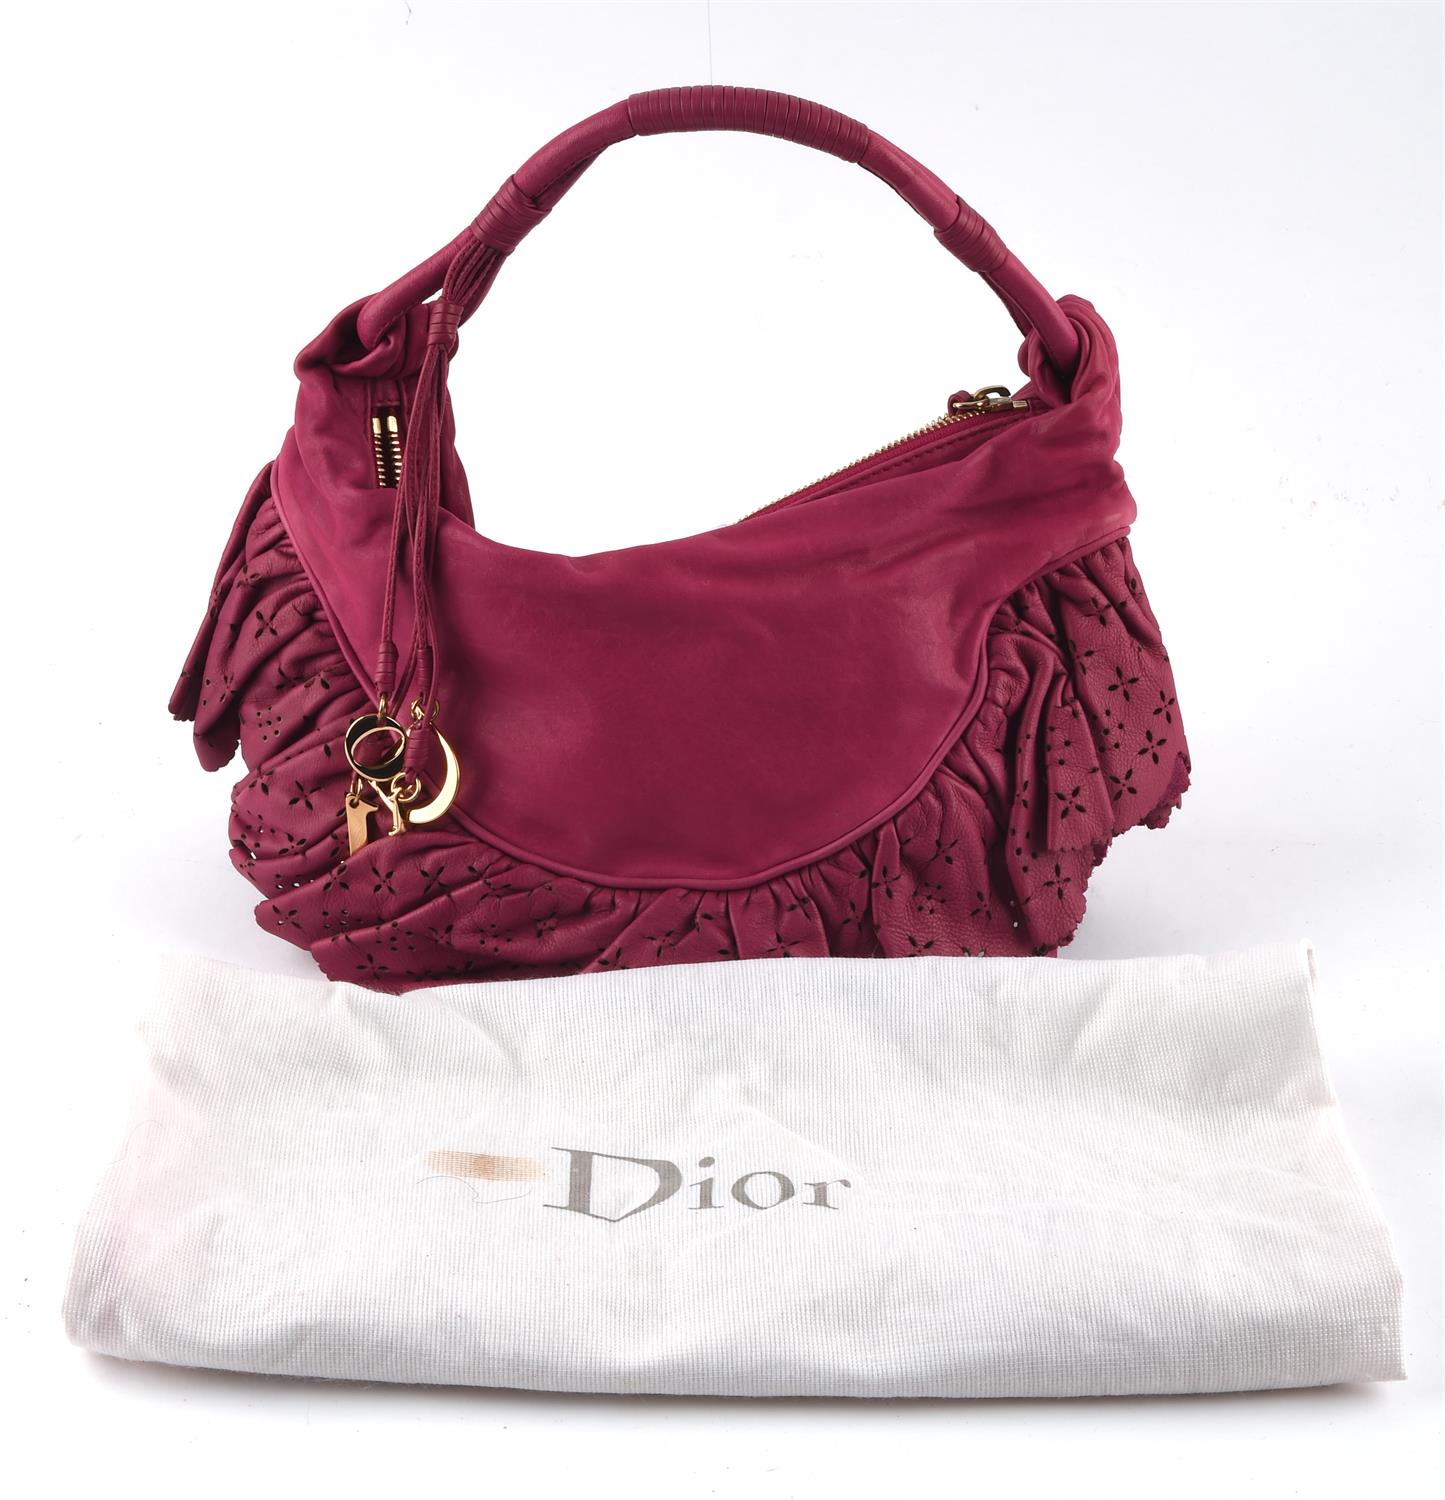 CHRISTIAN DIOR 1990s pink leather GYPSY handbag with red satin lining and authenticity card and